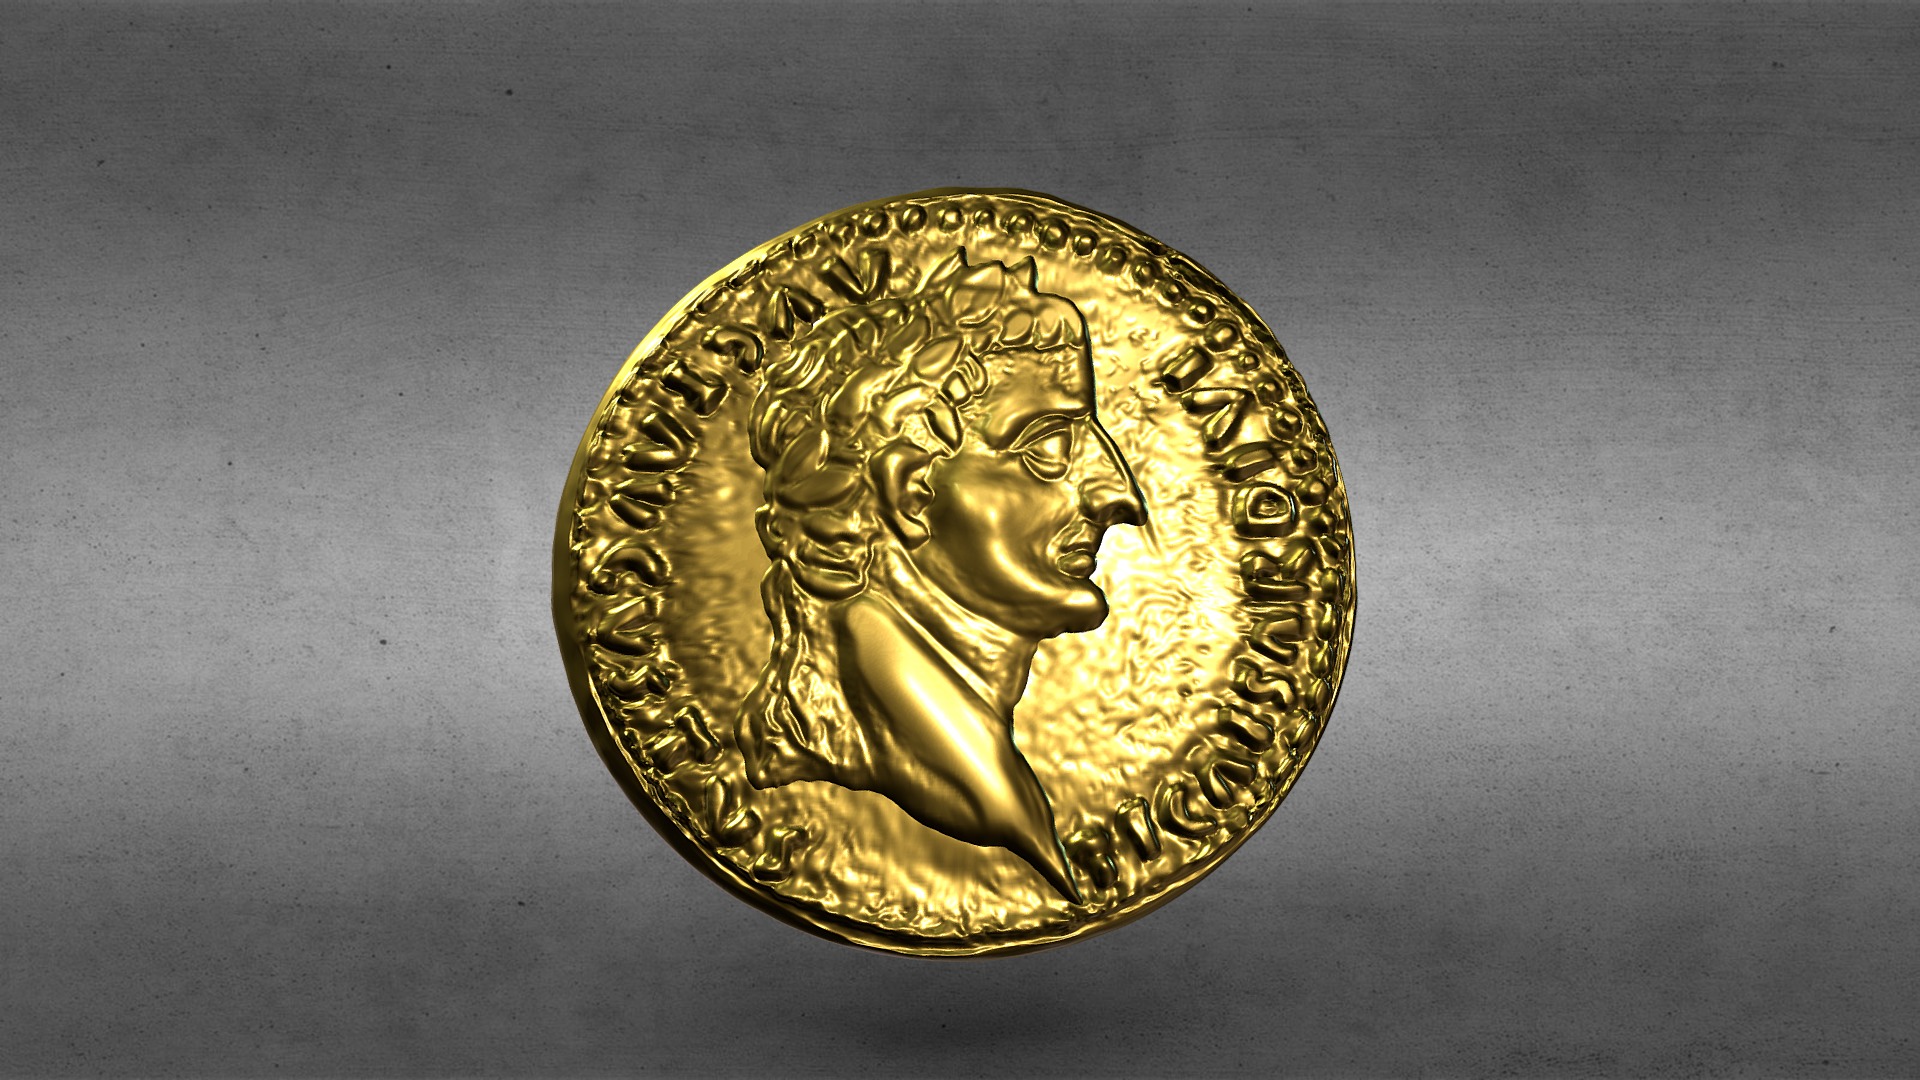 3D model Old Rome Coin-3d Print Model 2 - This is a 3D model of the Old Rome Coin-3d Print Model 2. The 3D model is about a gold coin with a lion on it.